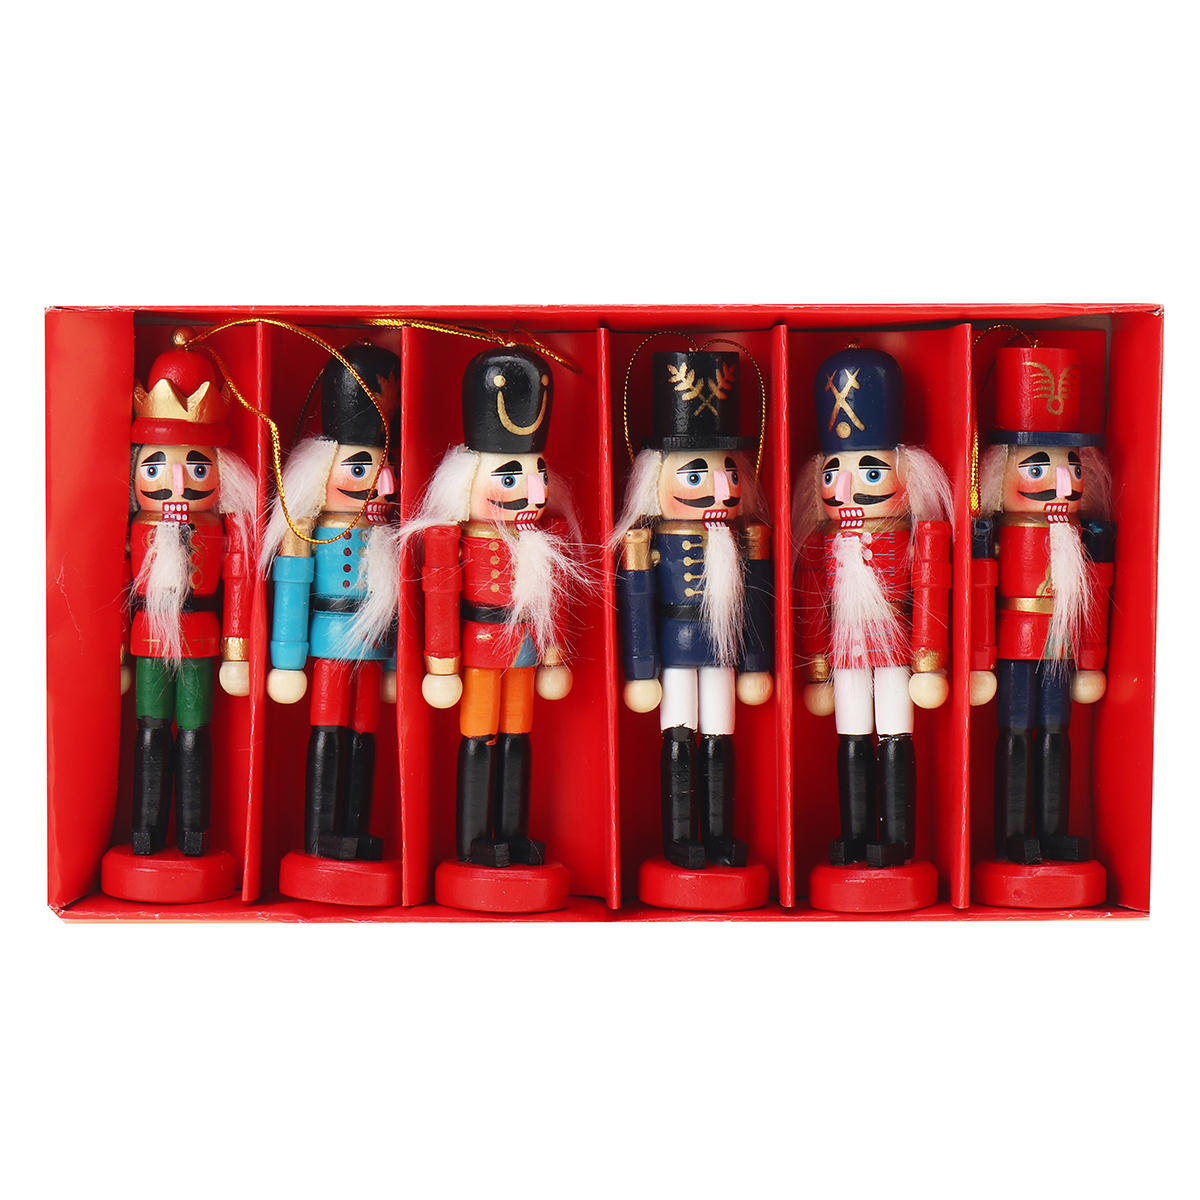 

6pcs 12cm Wooden Nutcracker Doll Soldier Christmas Ornaments Xmas Gifts Decorations